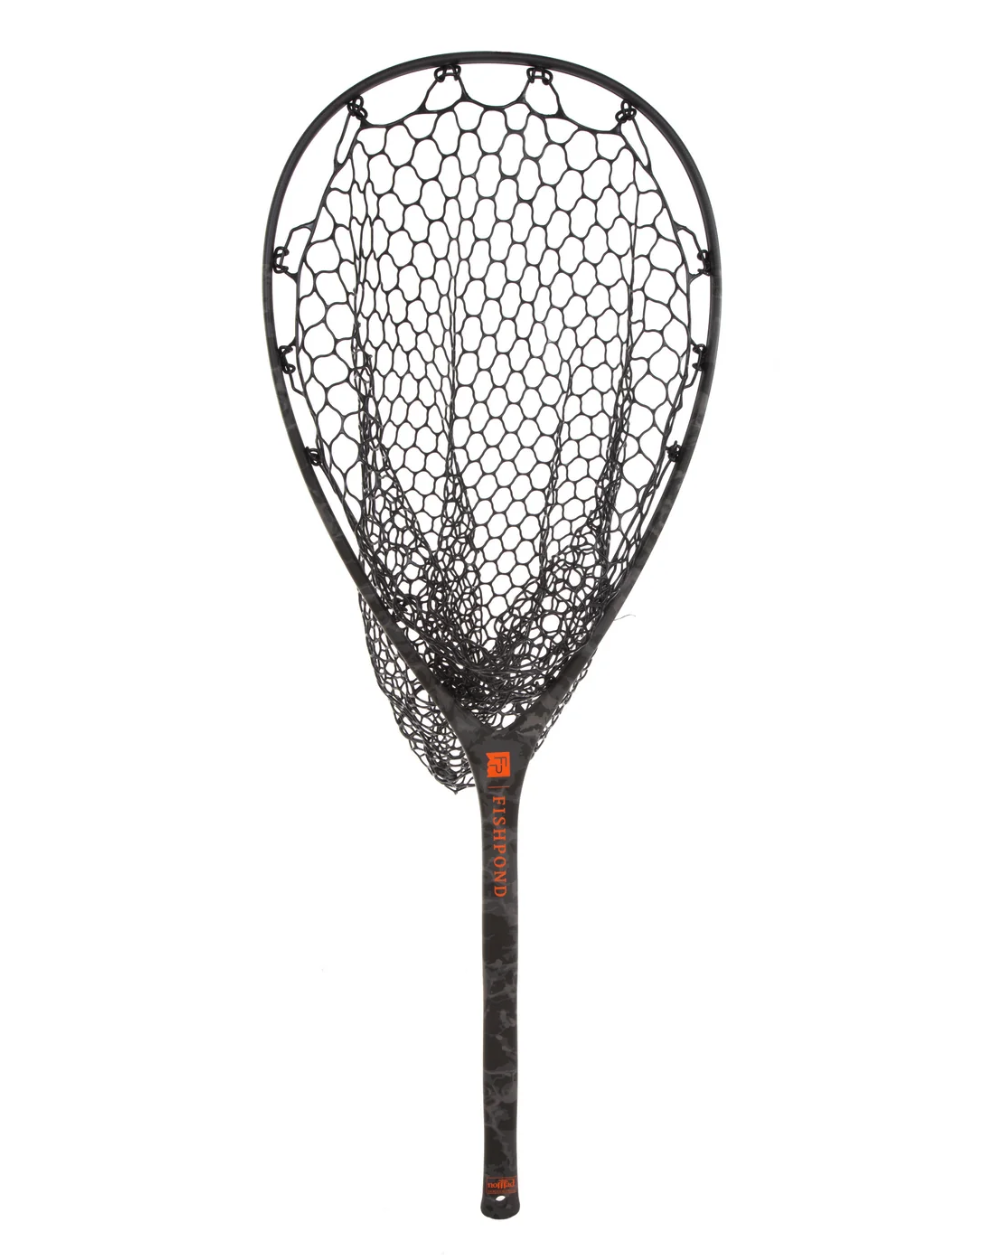 Fishpond Nomad Mid-Length Boat Net Wild Run Edition for sale online.